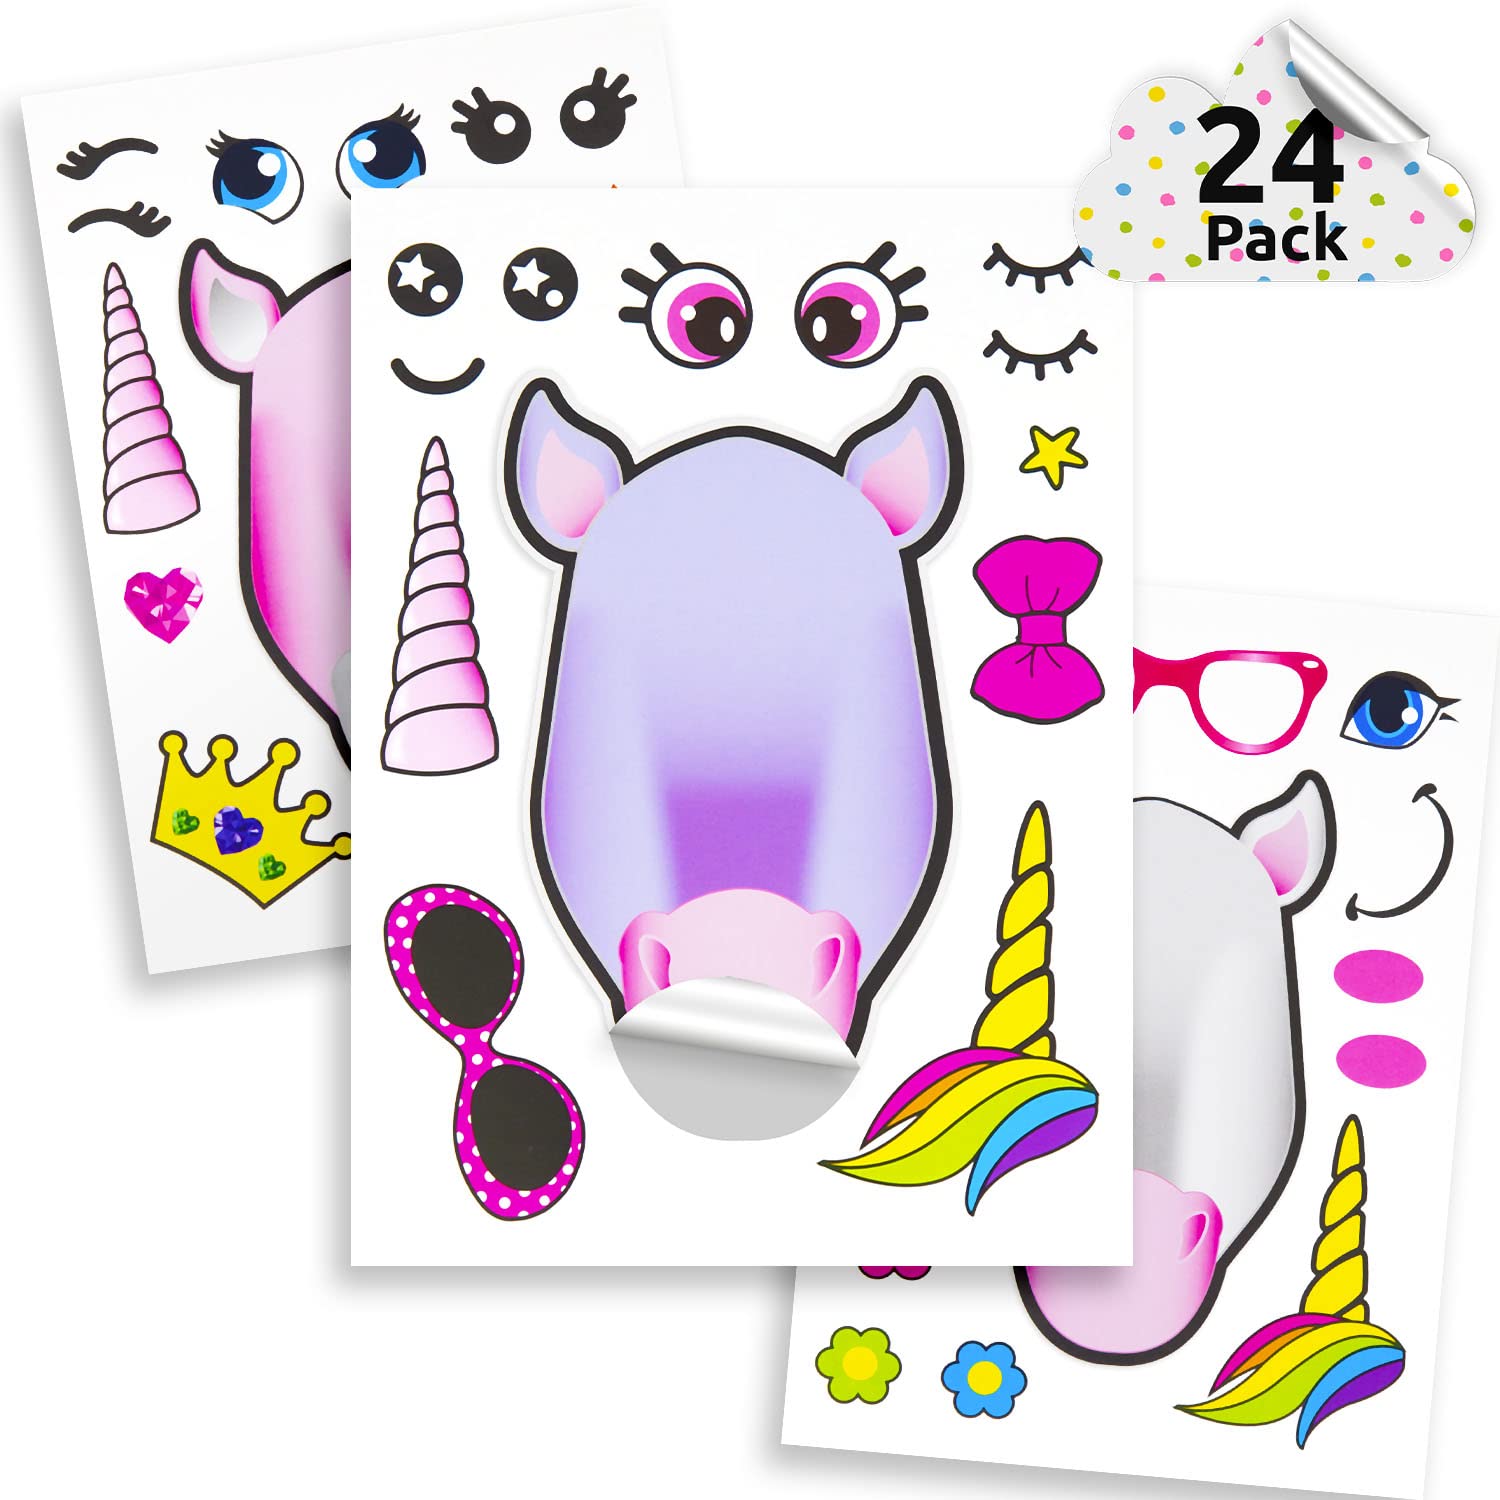 24 Make A Unicorn Stickers for Kids - Great Unicorn Theme Birthday Party Favors - Fun Craft Project for Children 3+ - Let Your Kids Get Creative & Design Their Favorite Unicorn Stickers